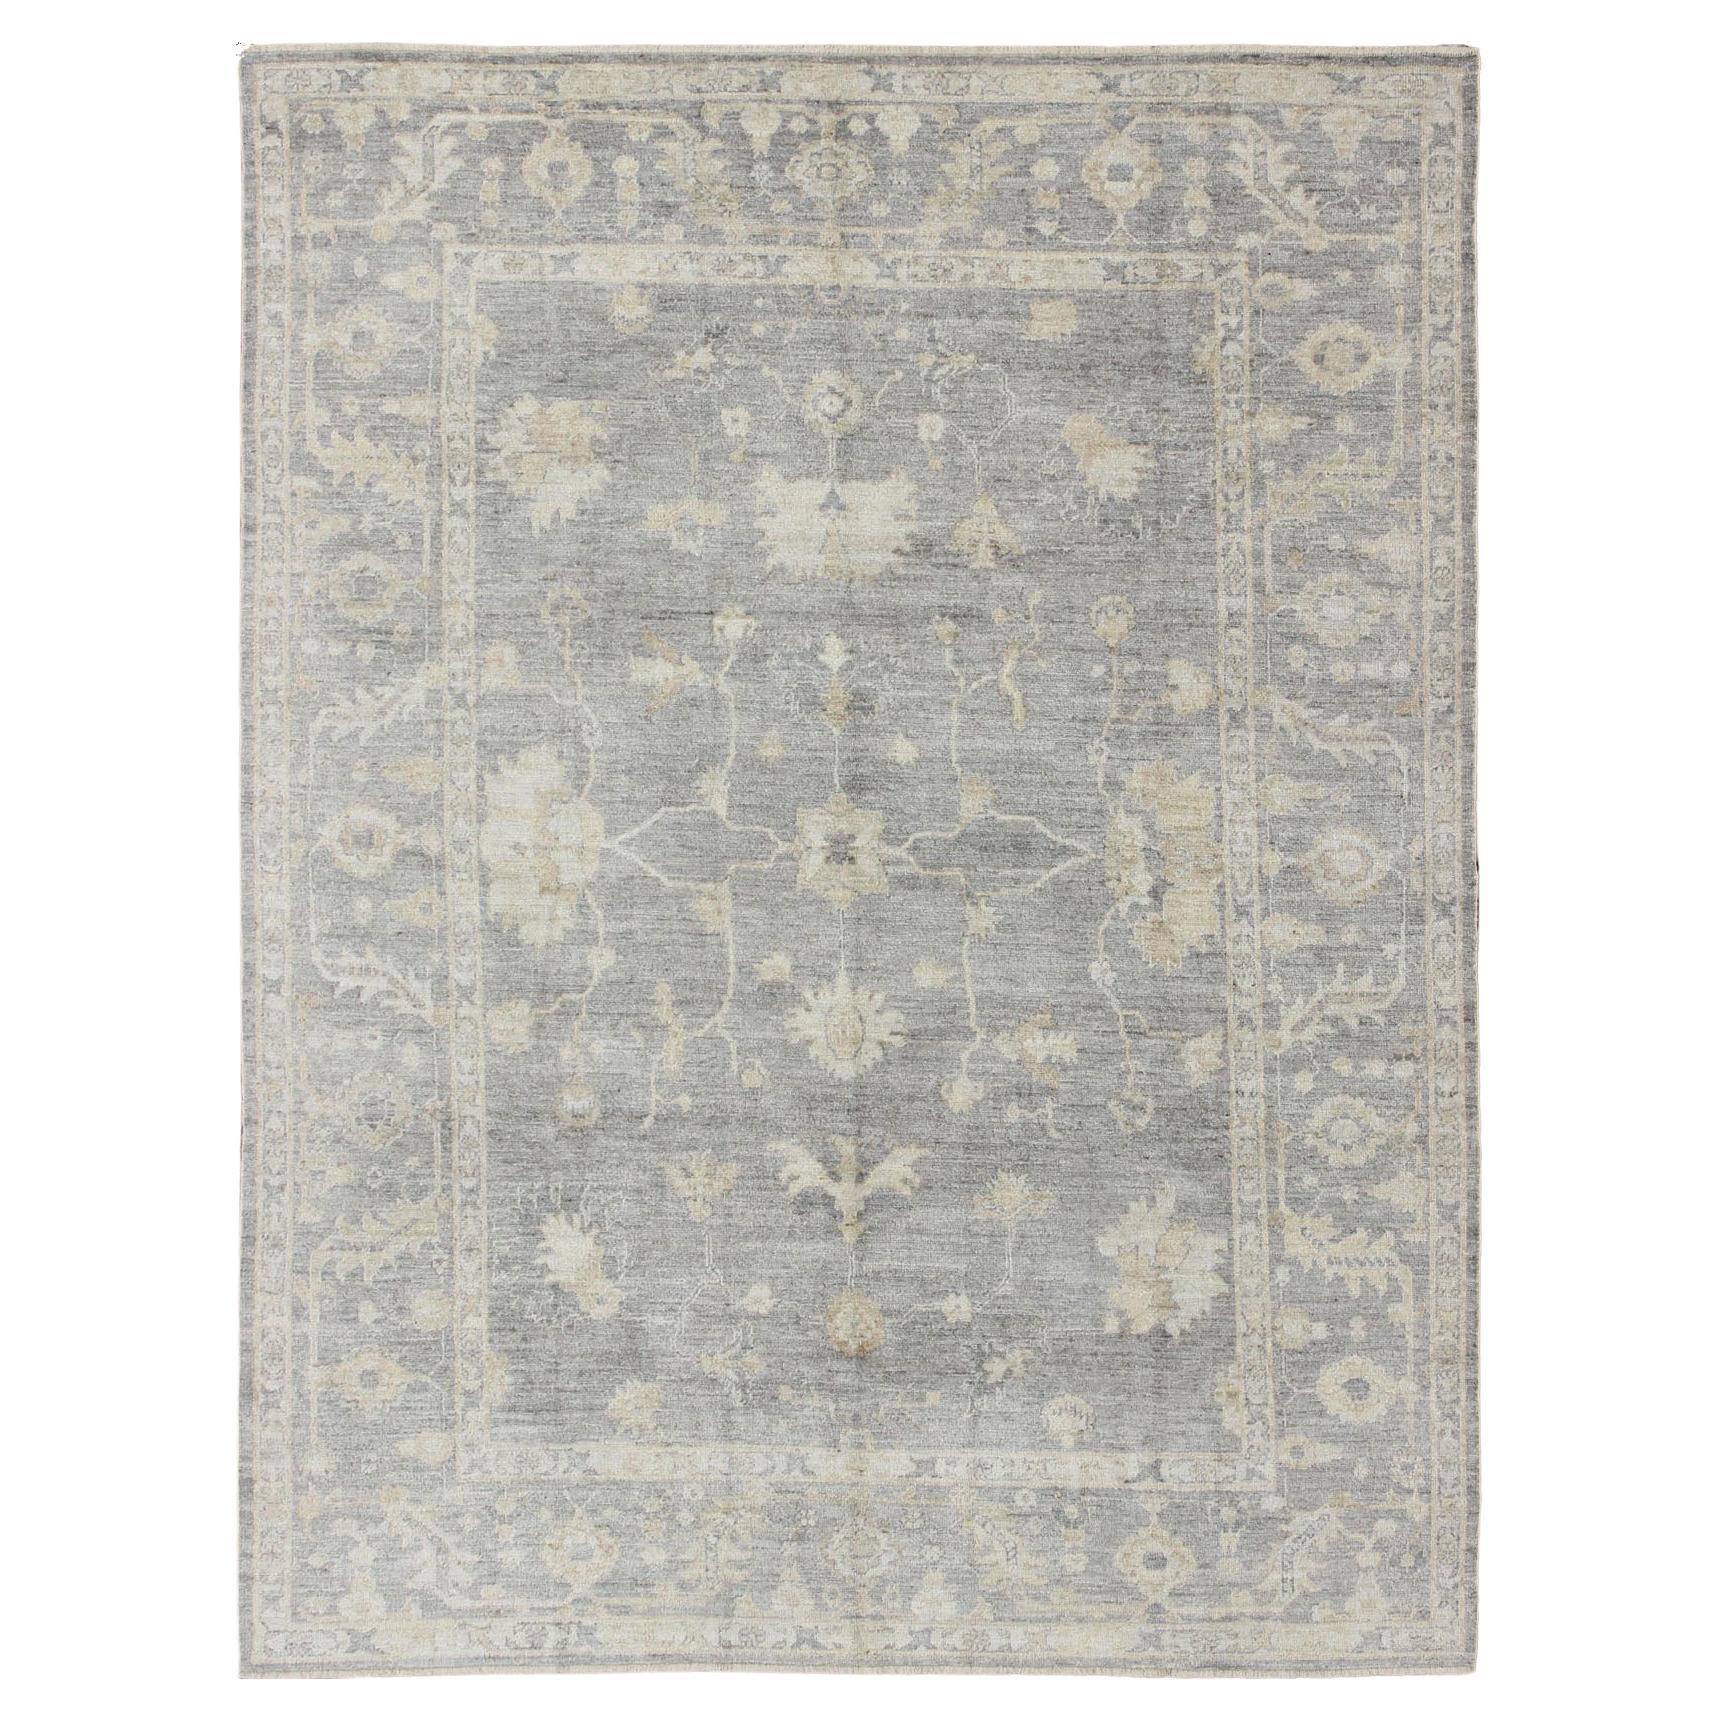 Keivan Woven Arts Turkish Angora Oushak Rug with Floral Design in Neutral For Sale